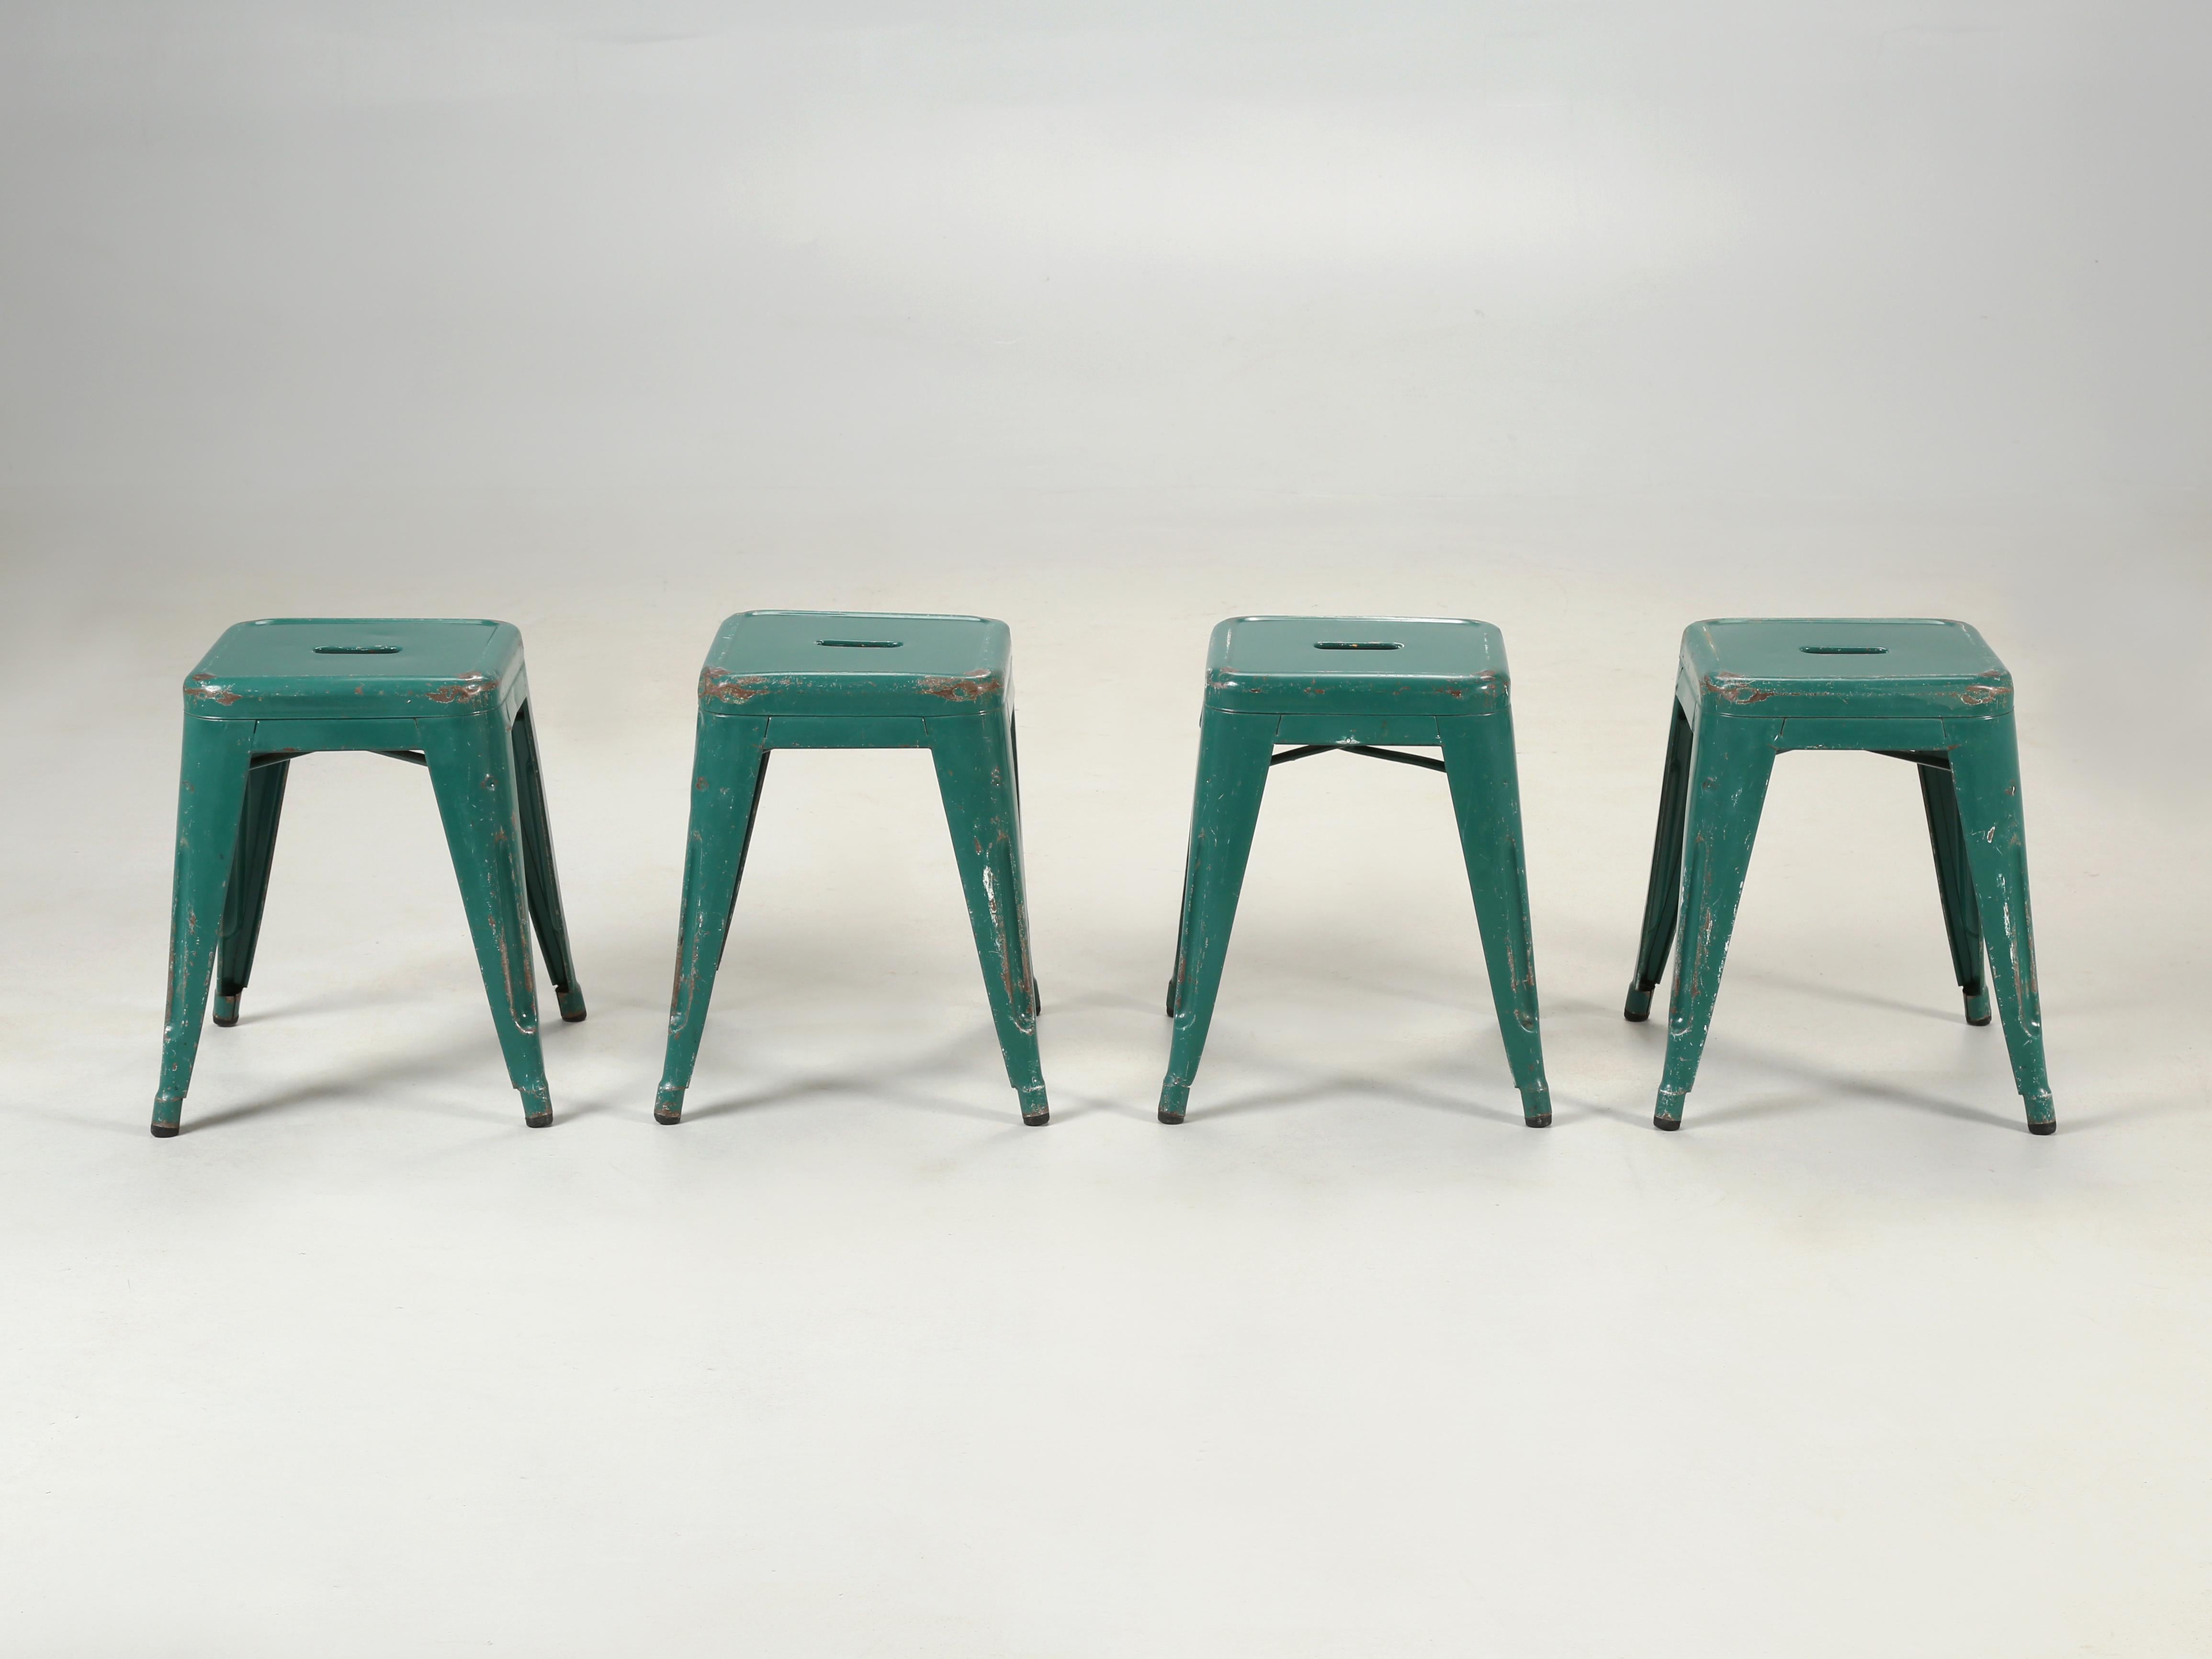 Vintage French Tolix steel stacking stools in a medium to dark green, with a great natural patina. We are thinking these Tolix stools are from the 1960's, however with a steel stool, it's almost impossible to select an accurate date. The paint is